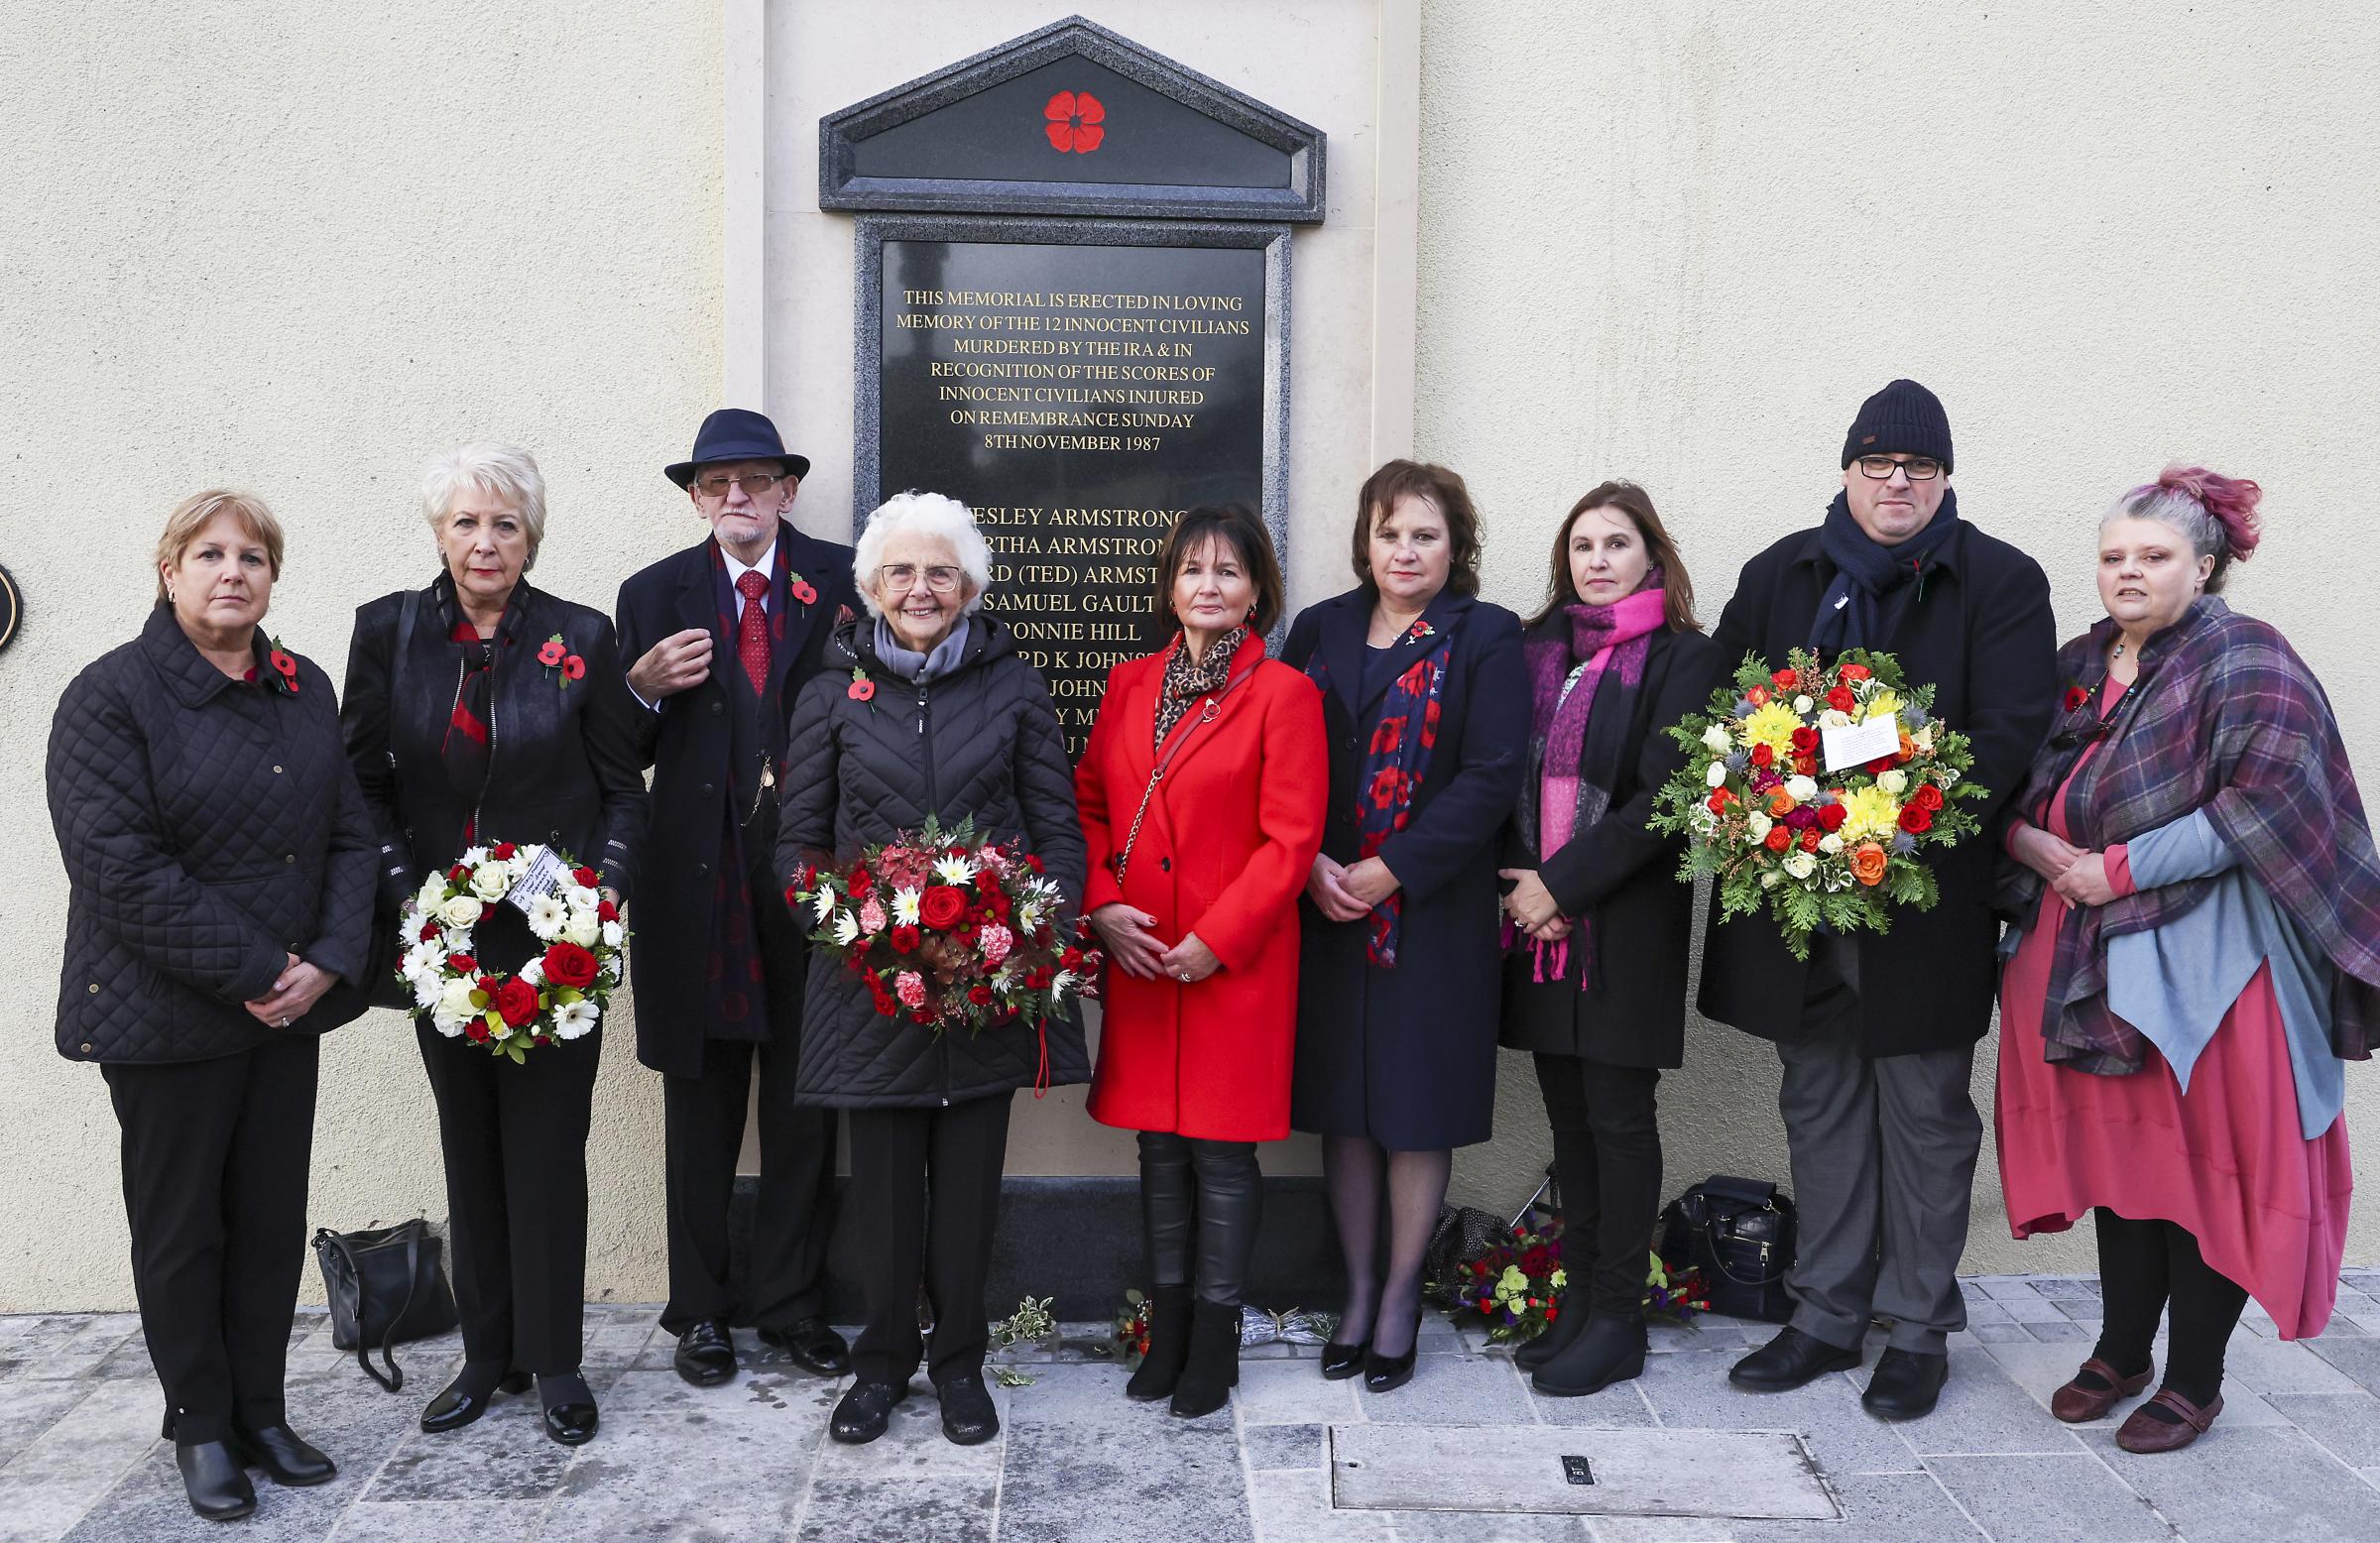 Attending The 35th anniversary of The Enniskillen Bomb at the new site of the memorial in Enniskillen are from left, Joan Anderson and Margaret Veitch, (daughters of William and Agnes Mullan), Jim Dixon, the most seriously injured person to survive the